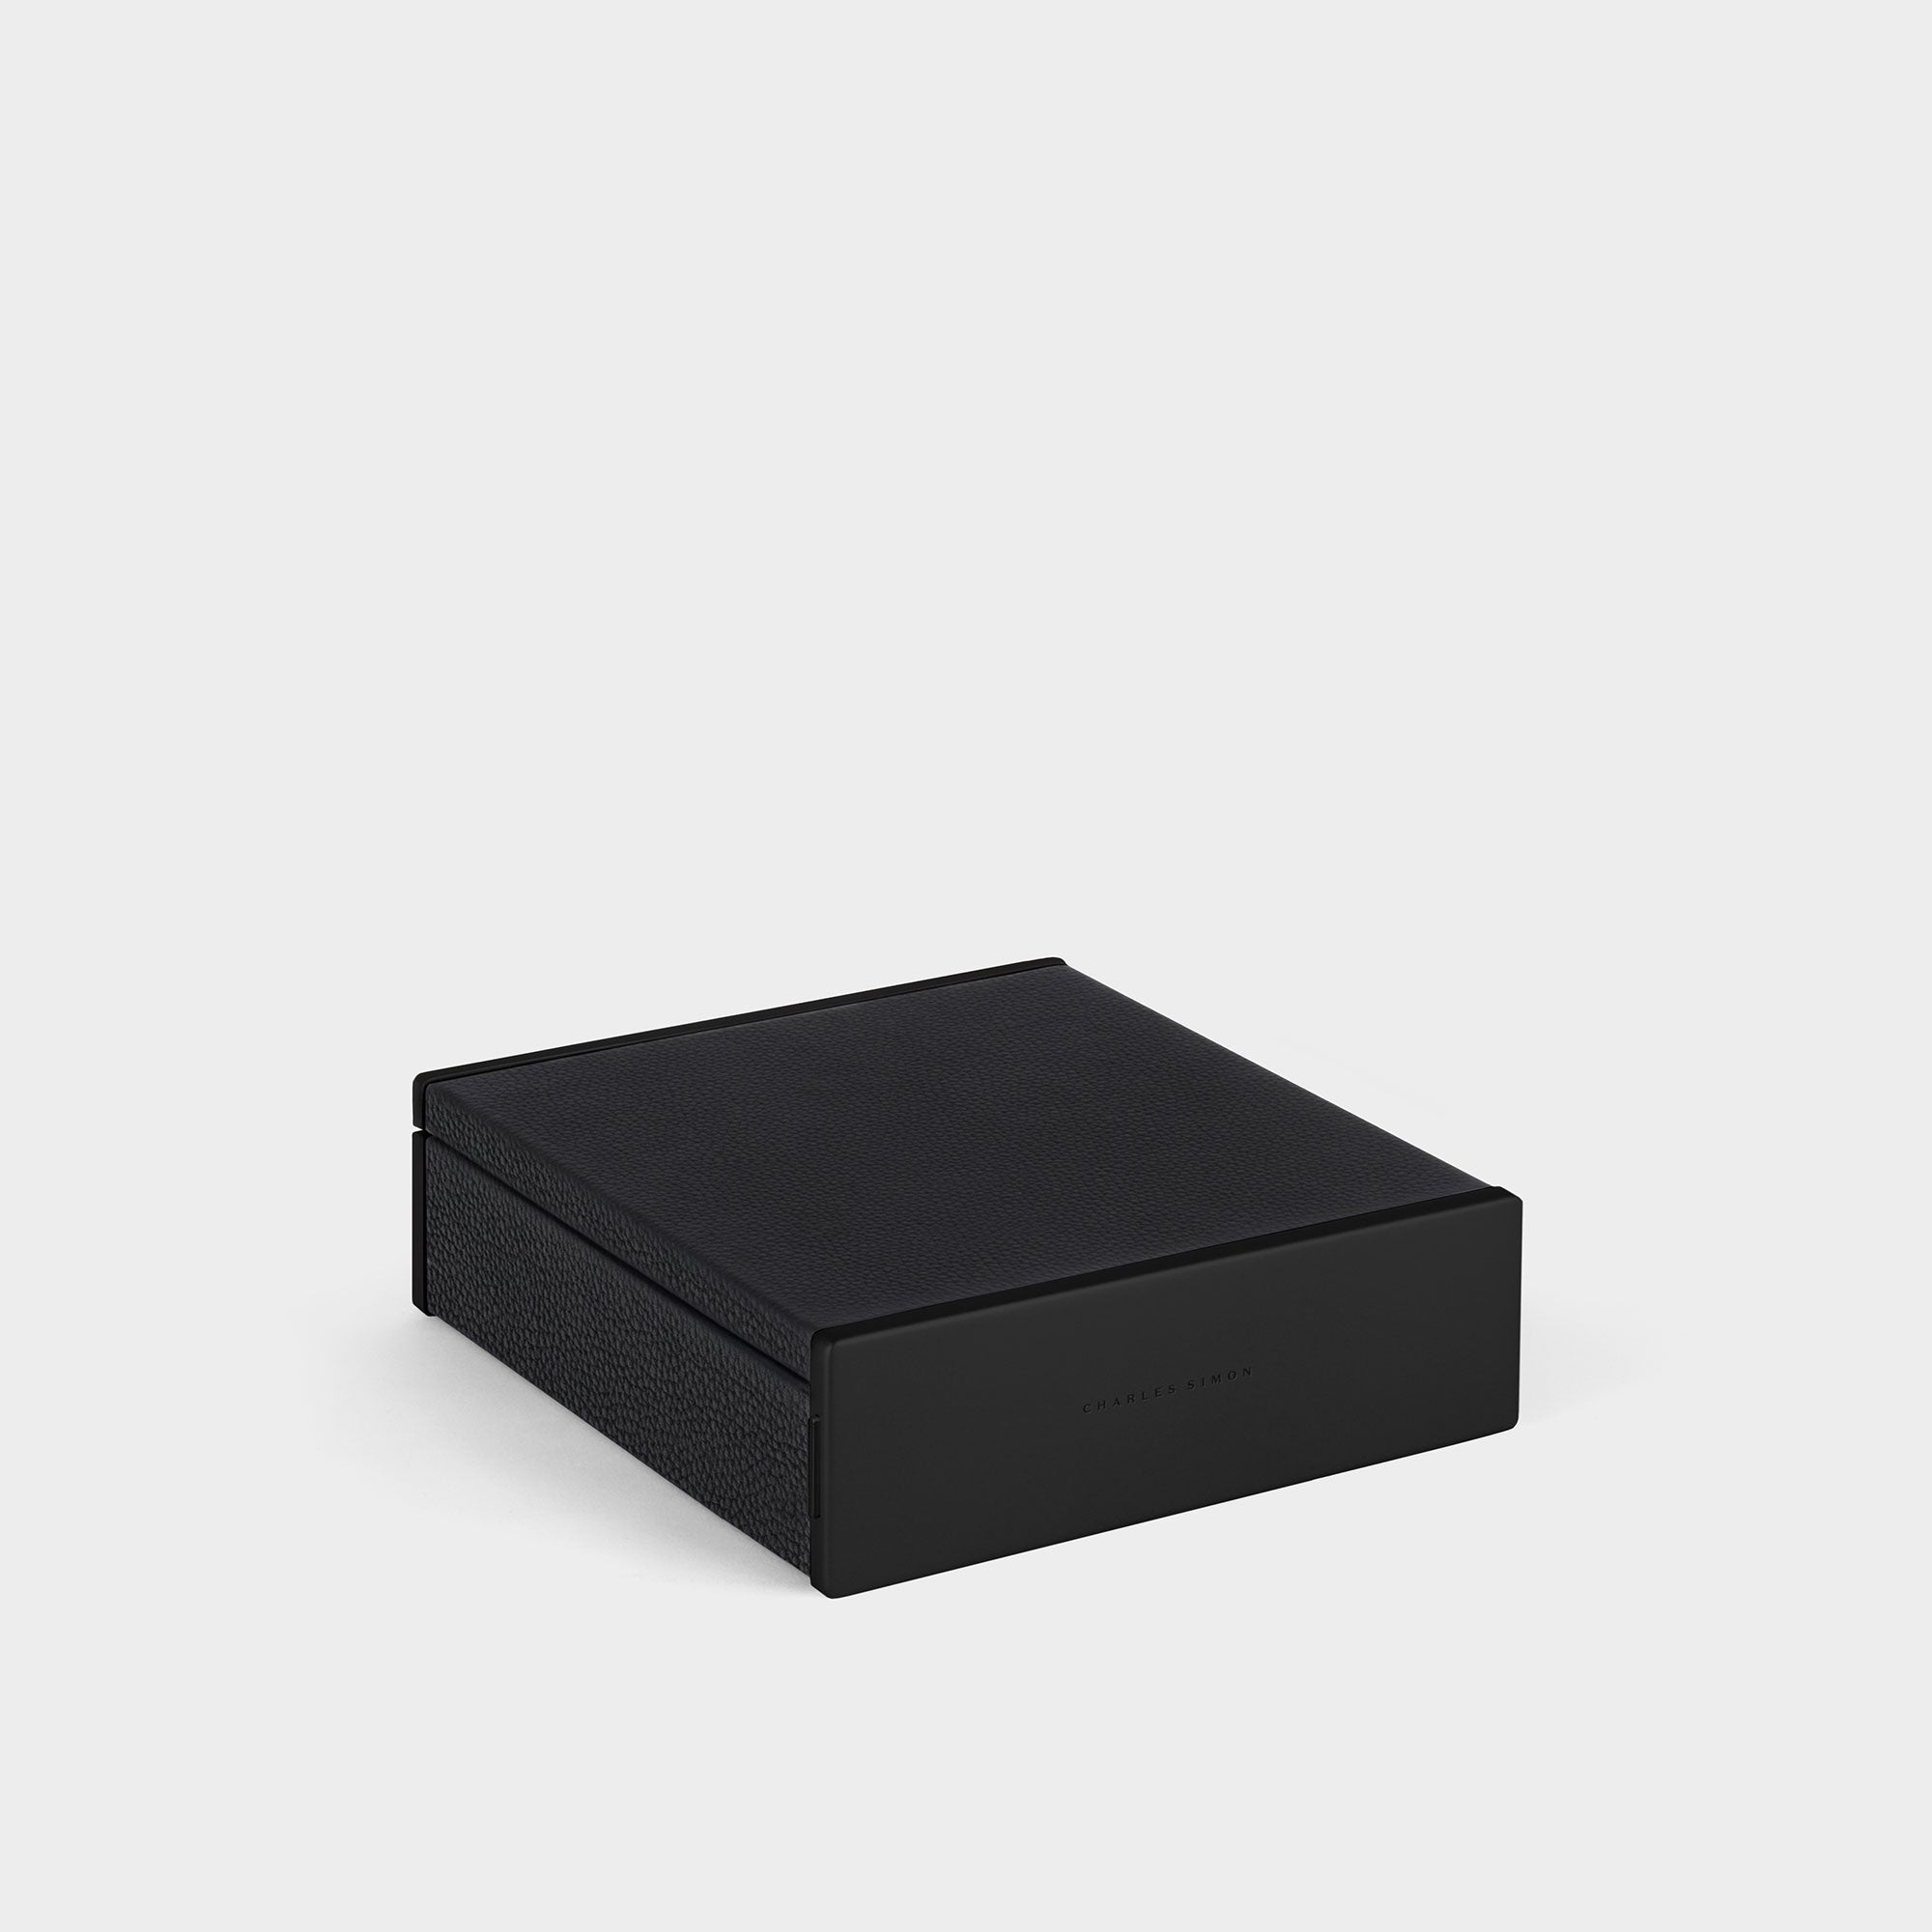 Closed all black designer watch box by Charles Simon. Handcrafted in Canada.